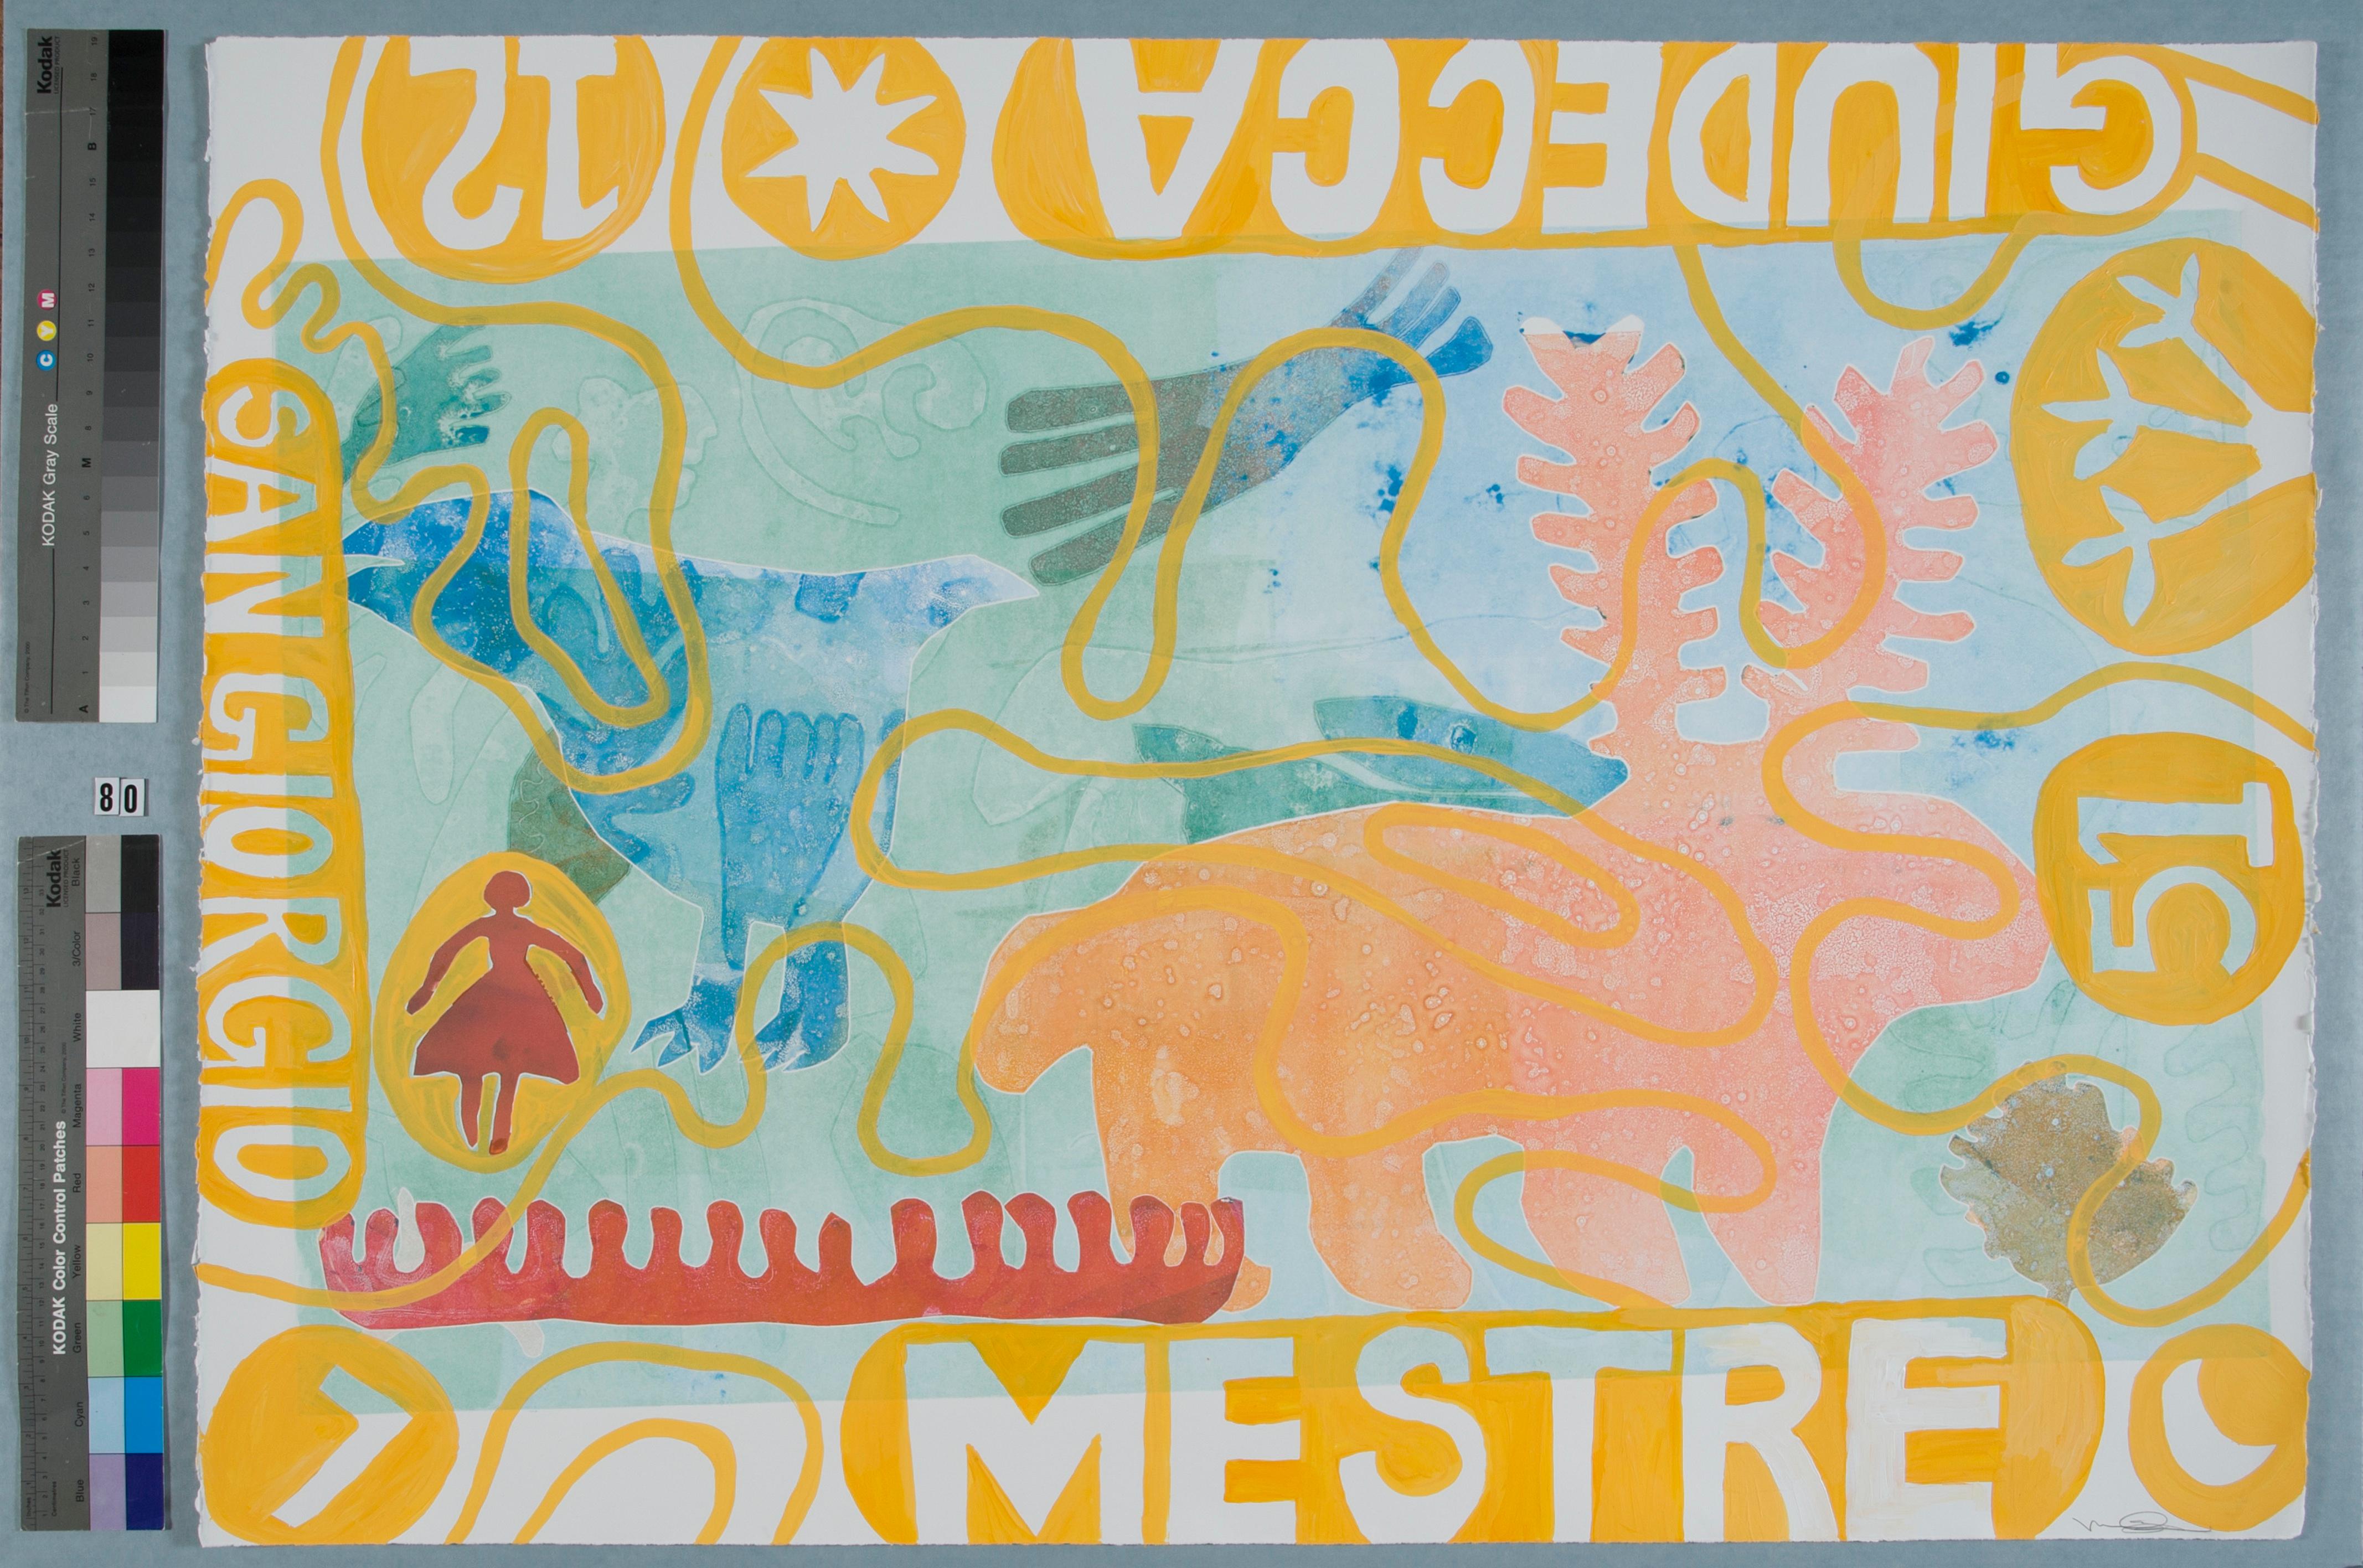 Mestre by Melanie Yazzie, monotype, Venice, Italy, Navajo, yellow, pink, blue 

Master printmaker Melanie Yazzie is Navajo and creates one of kind monotypes. This piece was inspired by her time in Venice, Italy printing and creating art as a